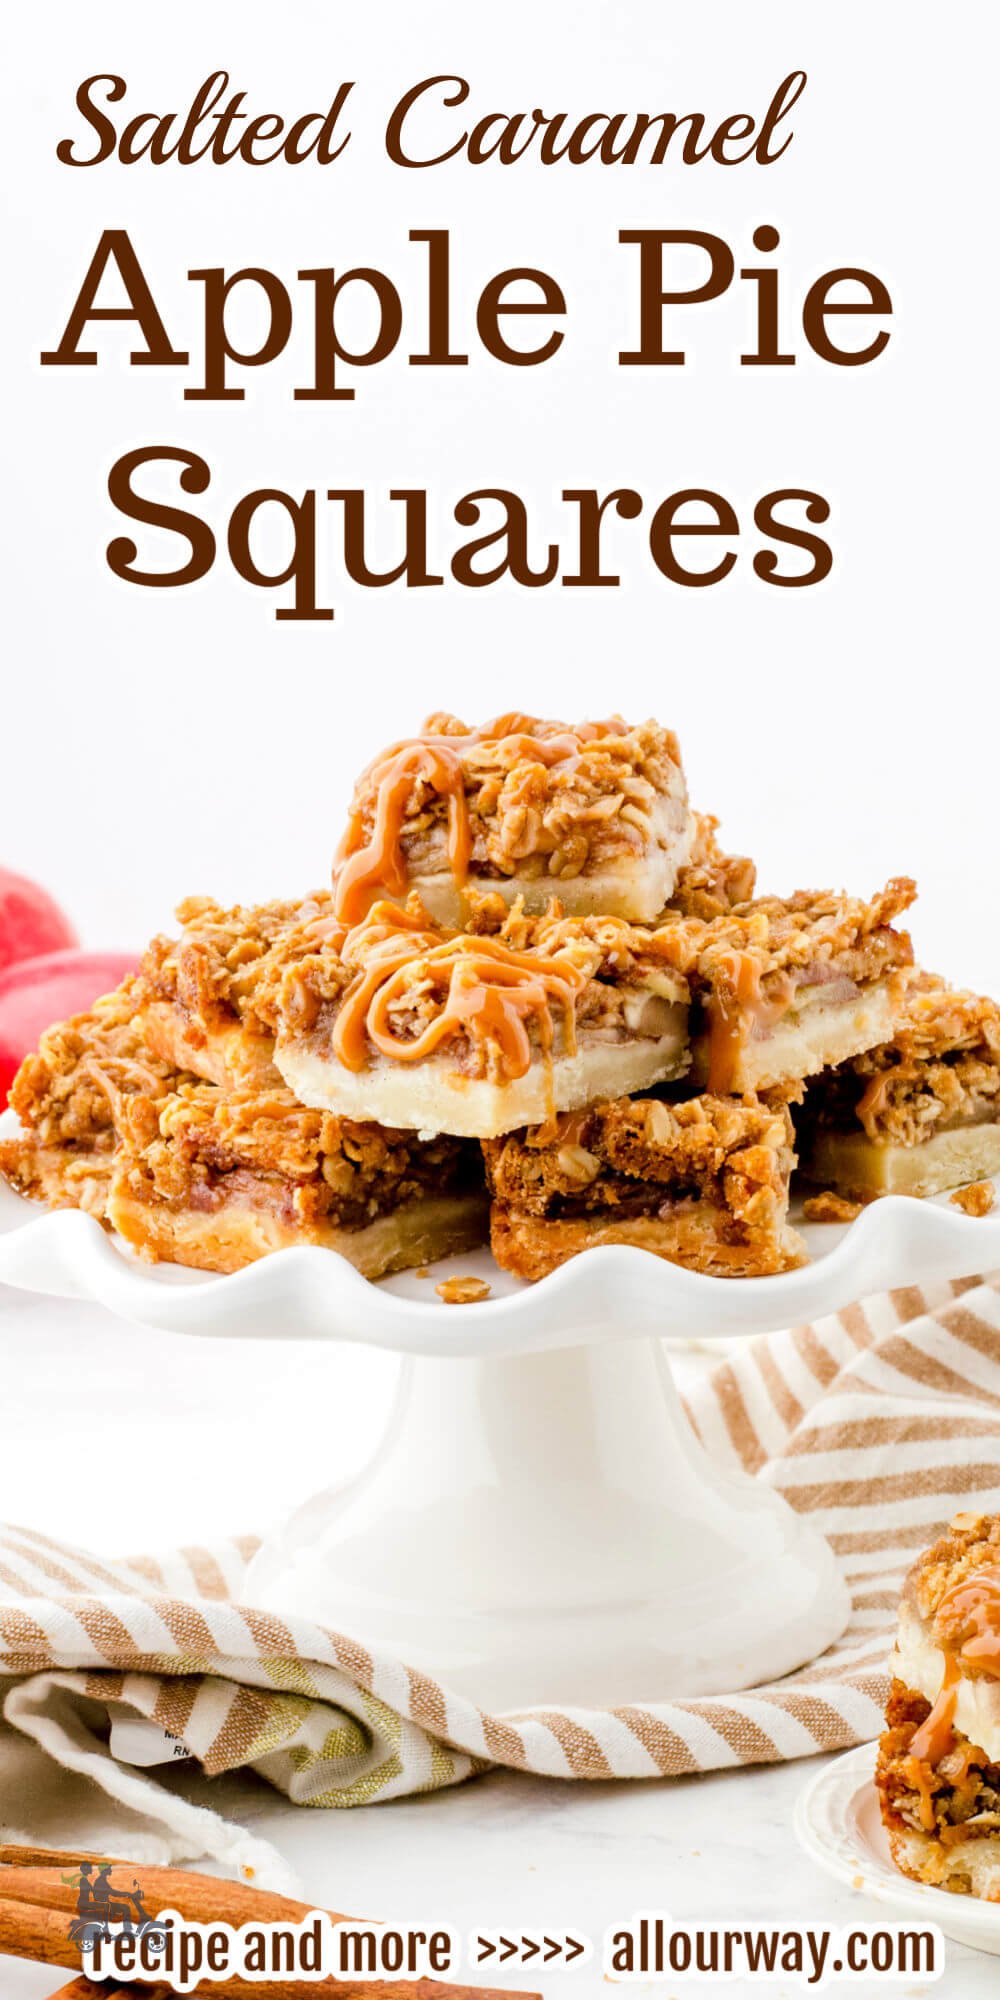 There's no need for a fork and knife when it comes to these caramel apple pie bars. Made with a buttery shortbread crust, layers of roasted apples, and topped with a crumble crust and a delicious caramel sauce, they're perfect for satisfying your sweet tooth. Plus, they're easy to make also! Make these apple squares for you Fall and Halloween parties.